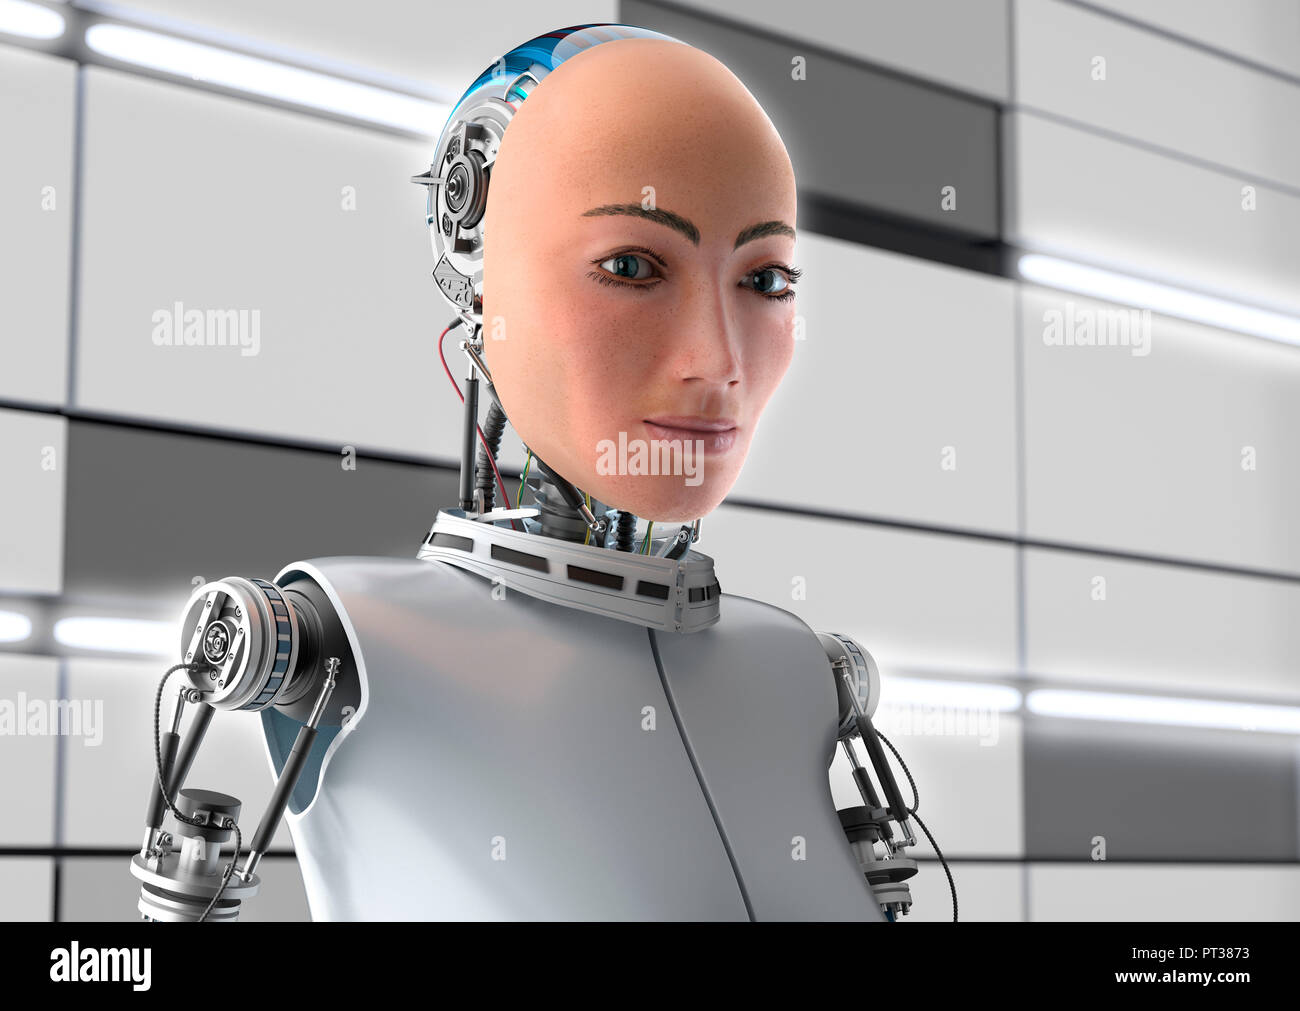 Female robot Android with realistic face, mechanical back of the head and upper body in front of bright laboratory wall. Stock Photo